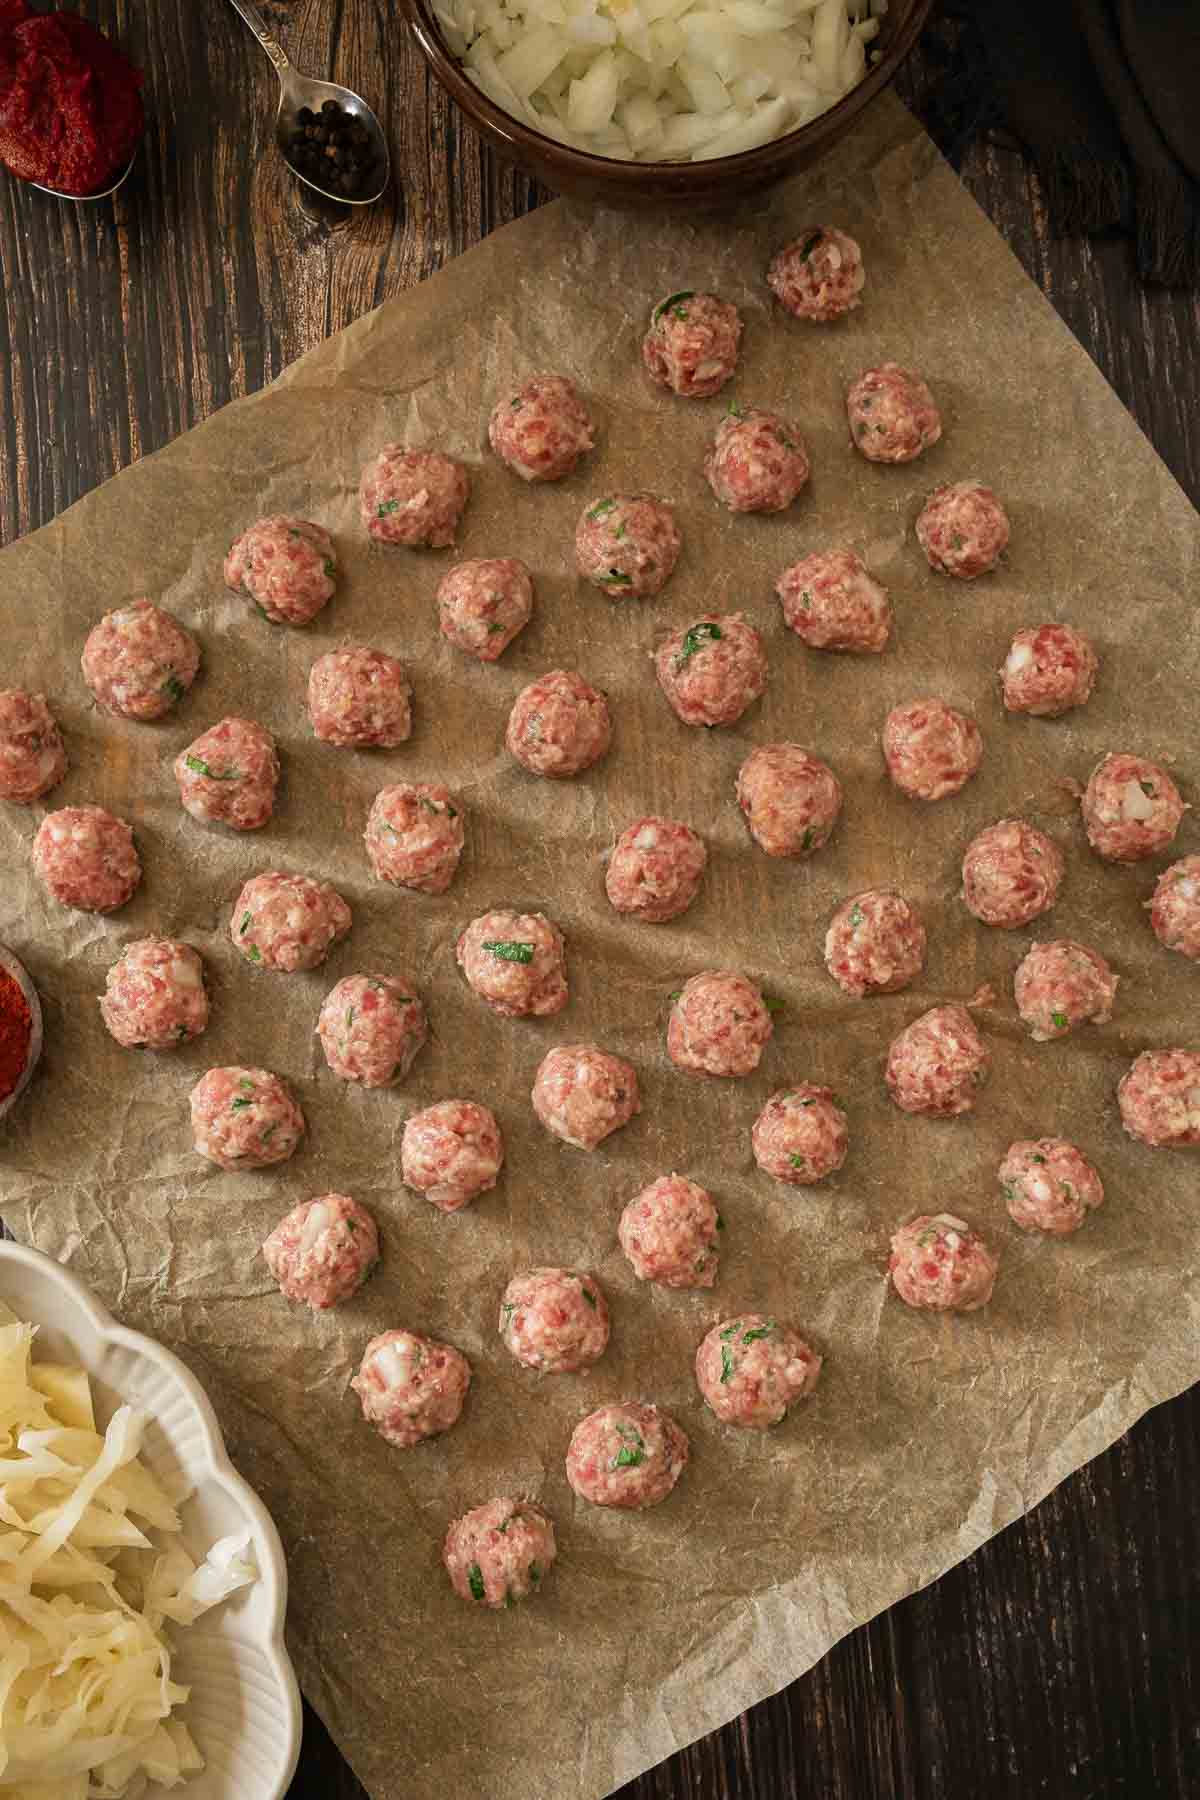 A sheet of parchment paper covered in small meatballs.